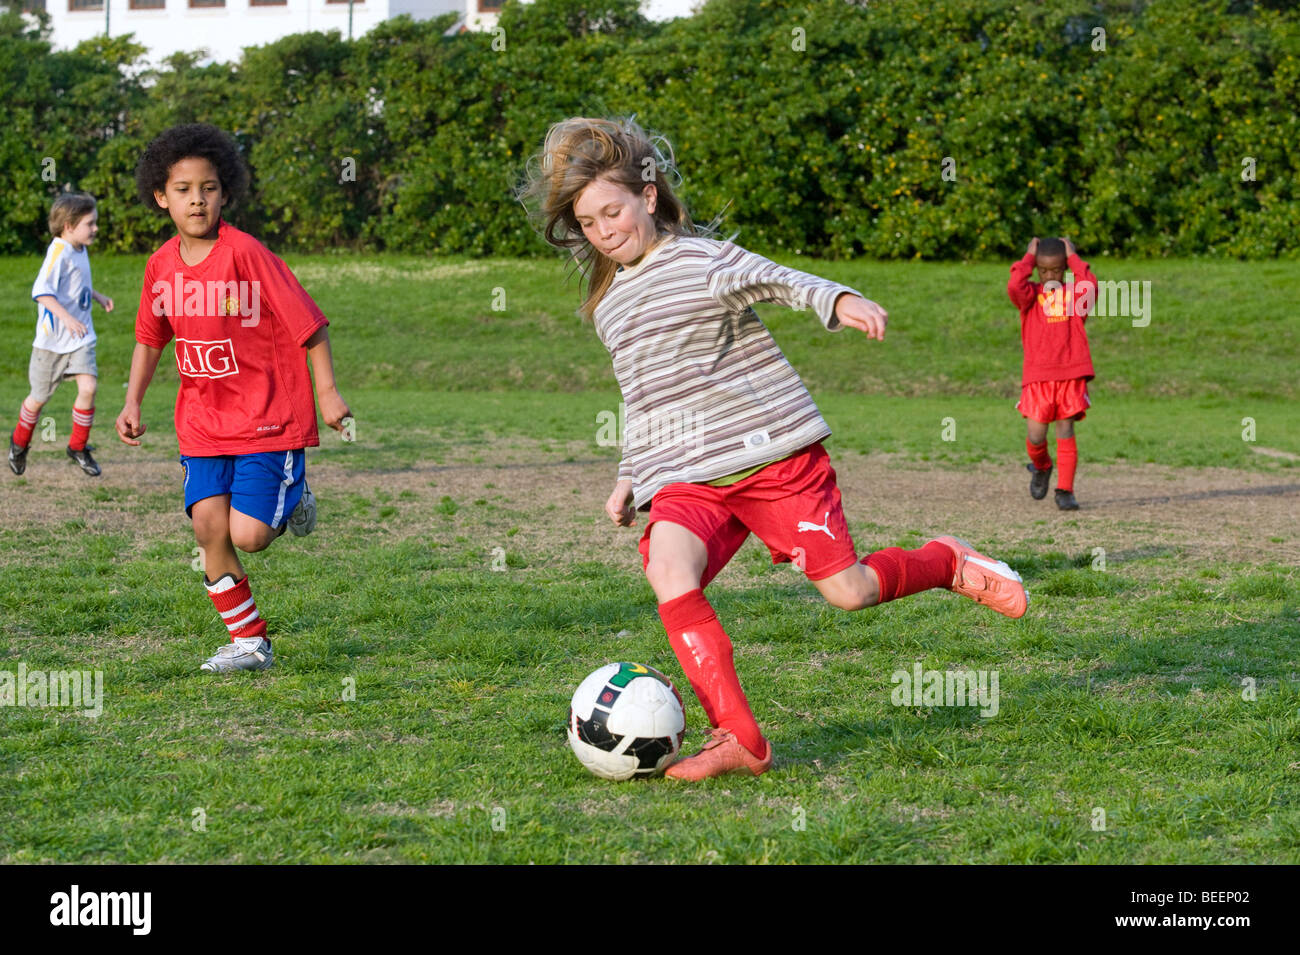 Girl playing soccer in a Under 11 soccer team, Cape Town, South Africa Stock Photo